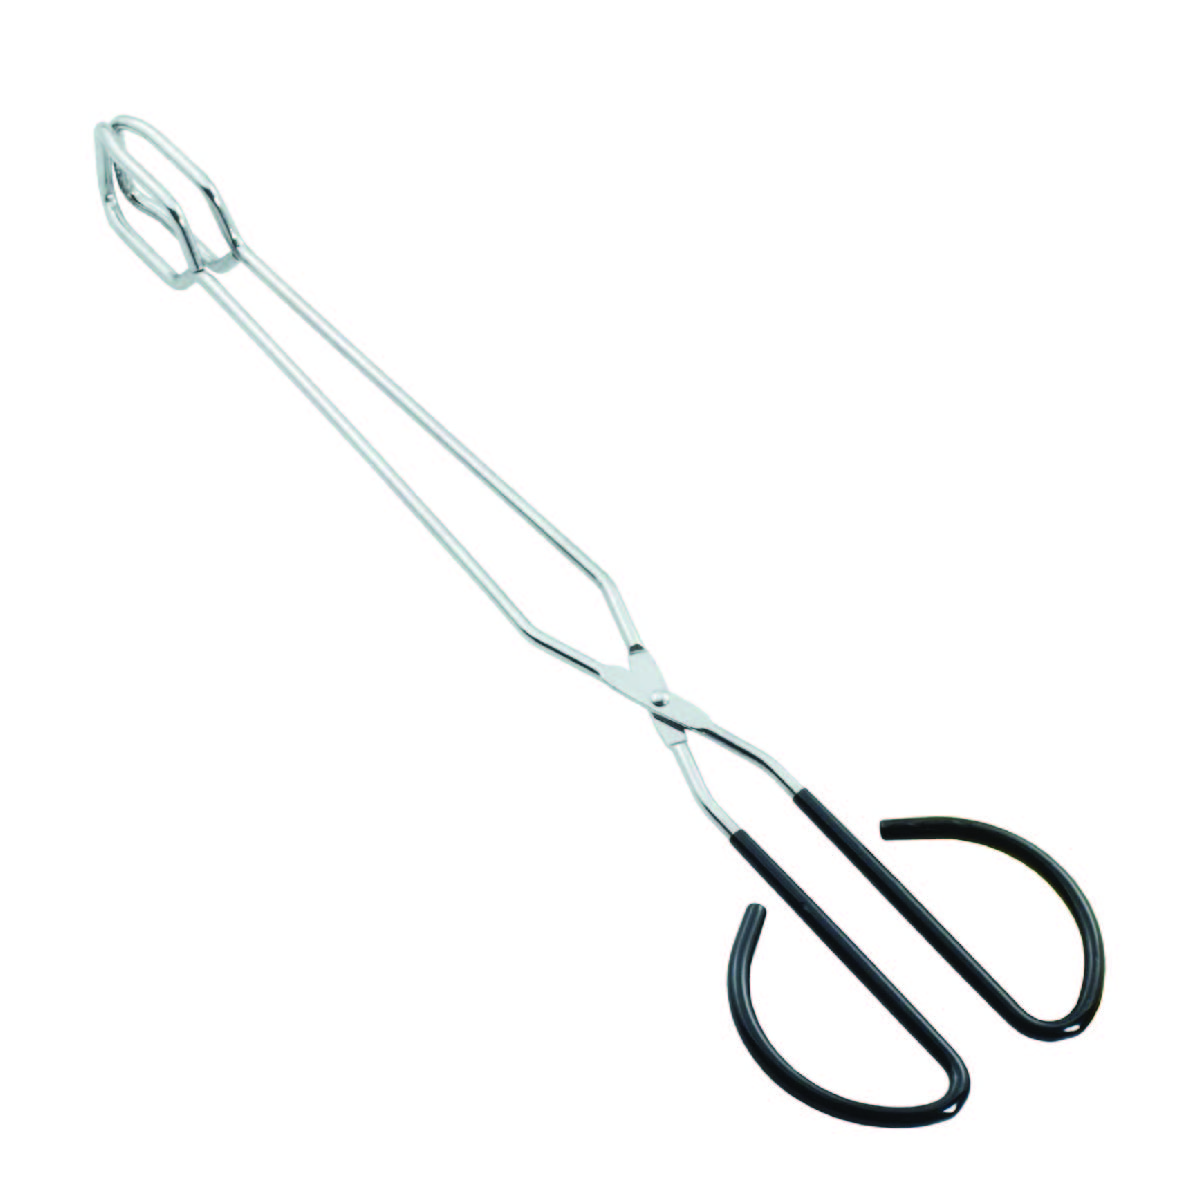 A pair of stainless steel tongs with black rubber grip handles.